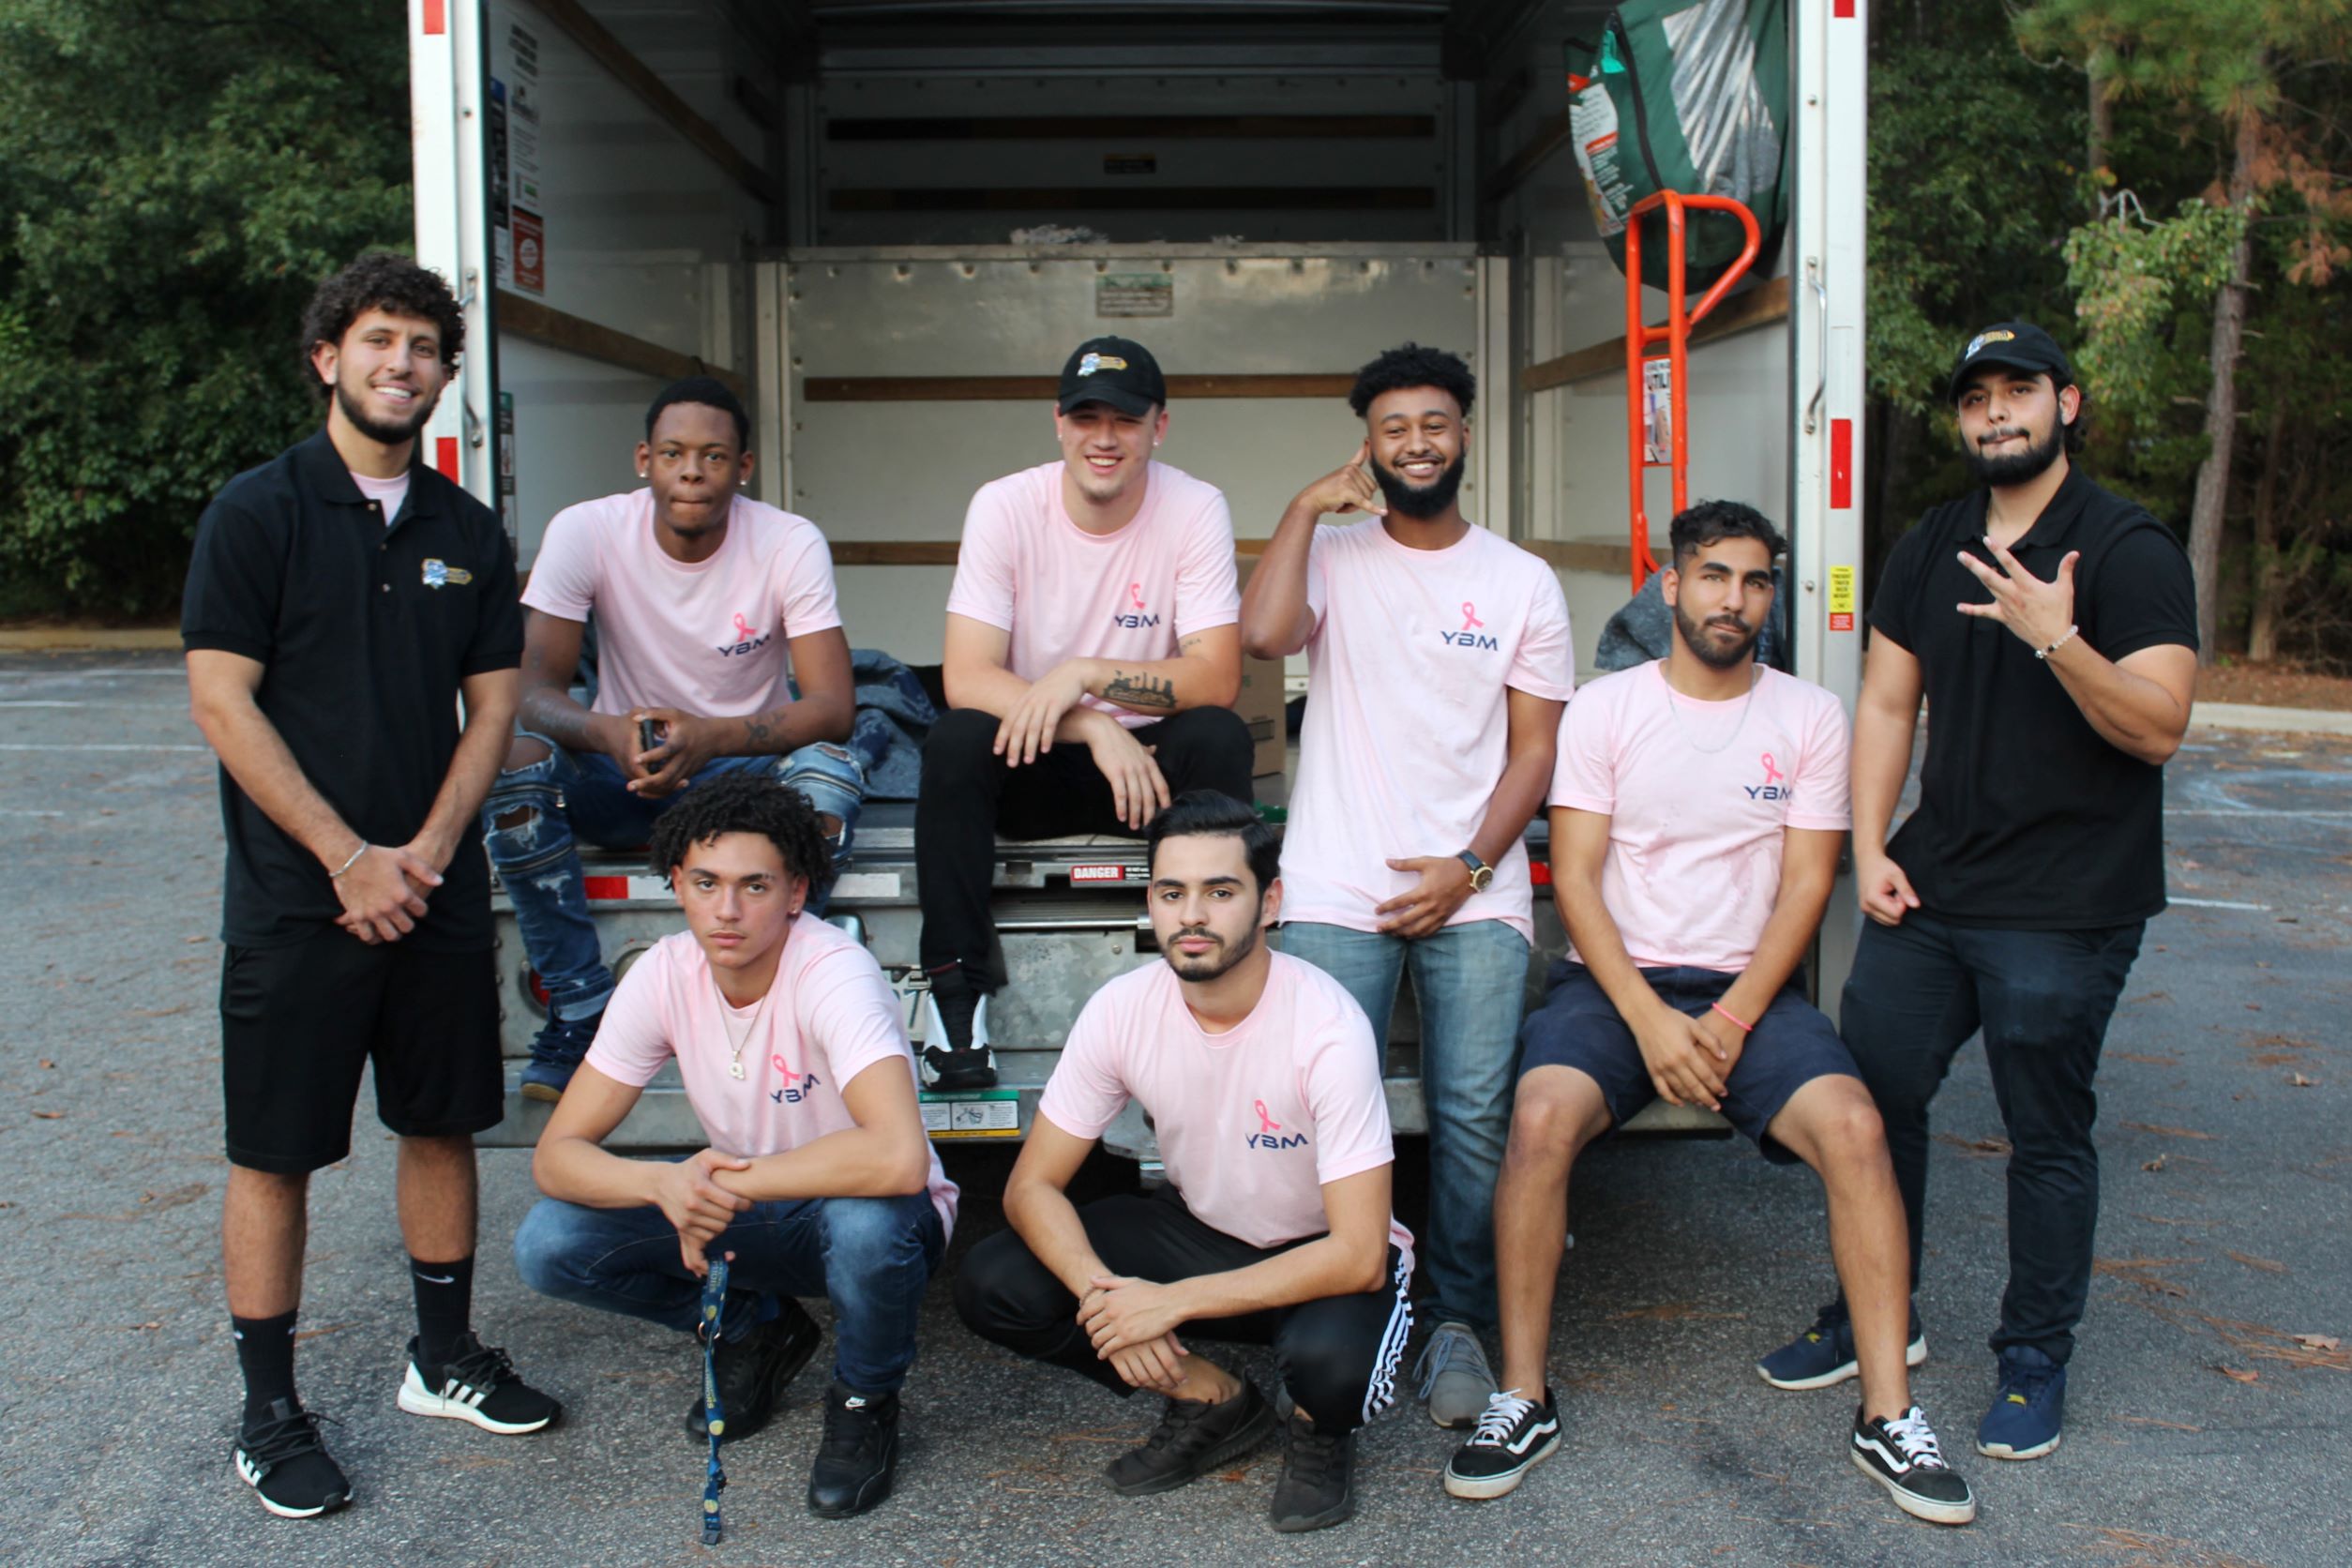 YBM crew members and leaders pose with the breact cancer awareness merch infront of a truck